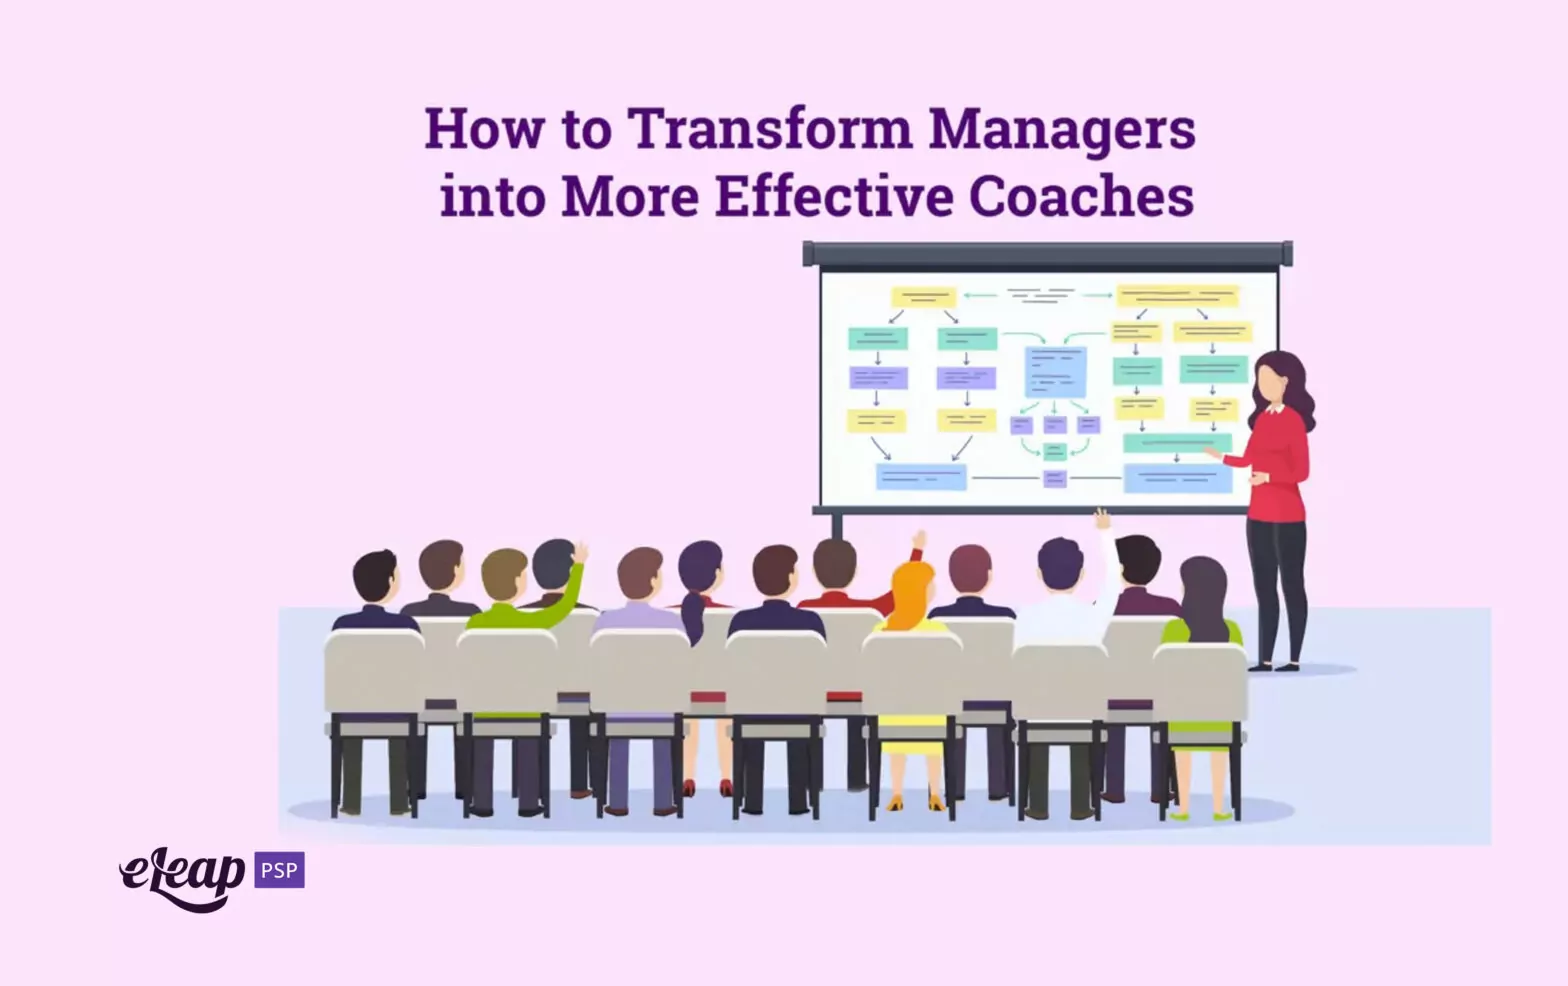 How to Transform Managers into More Effective Coaches